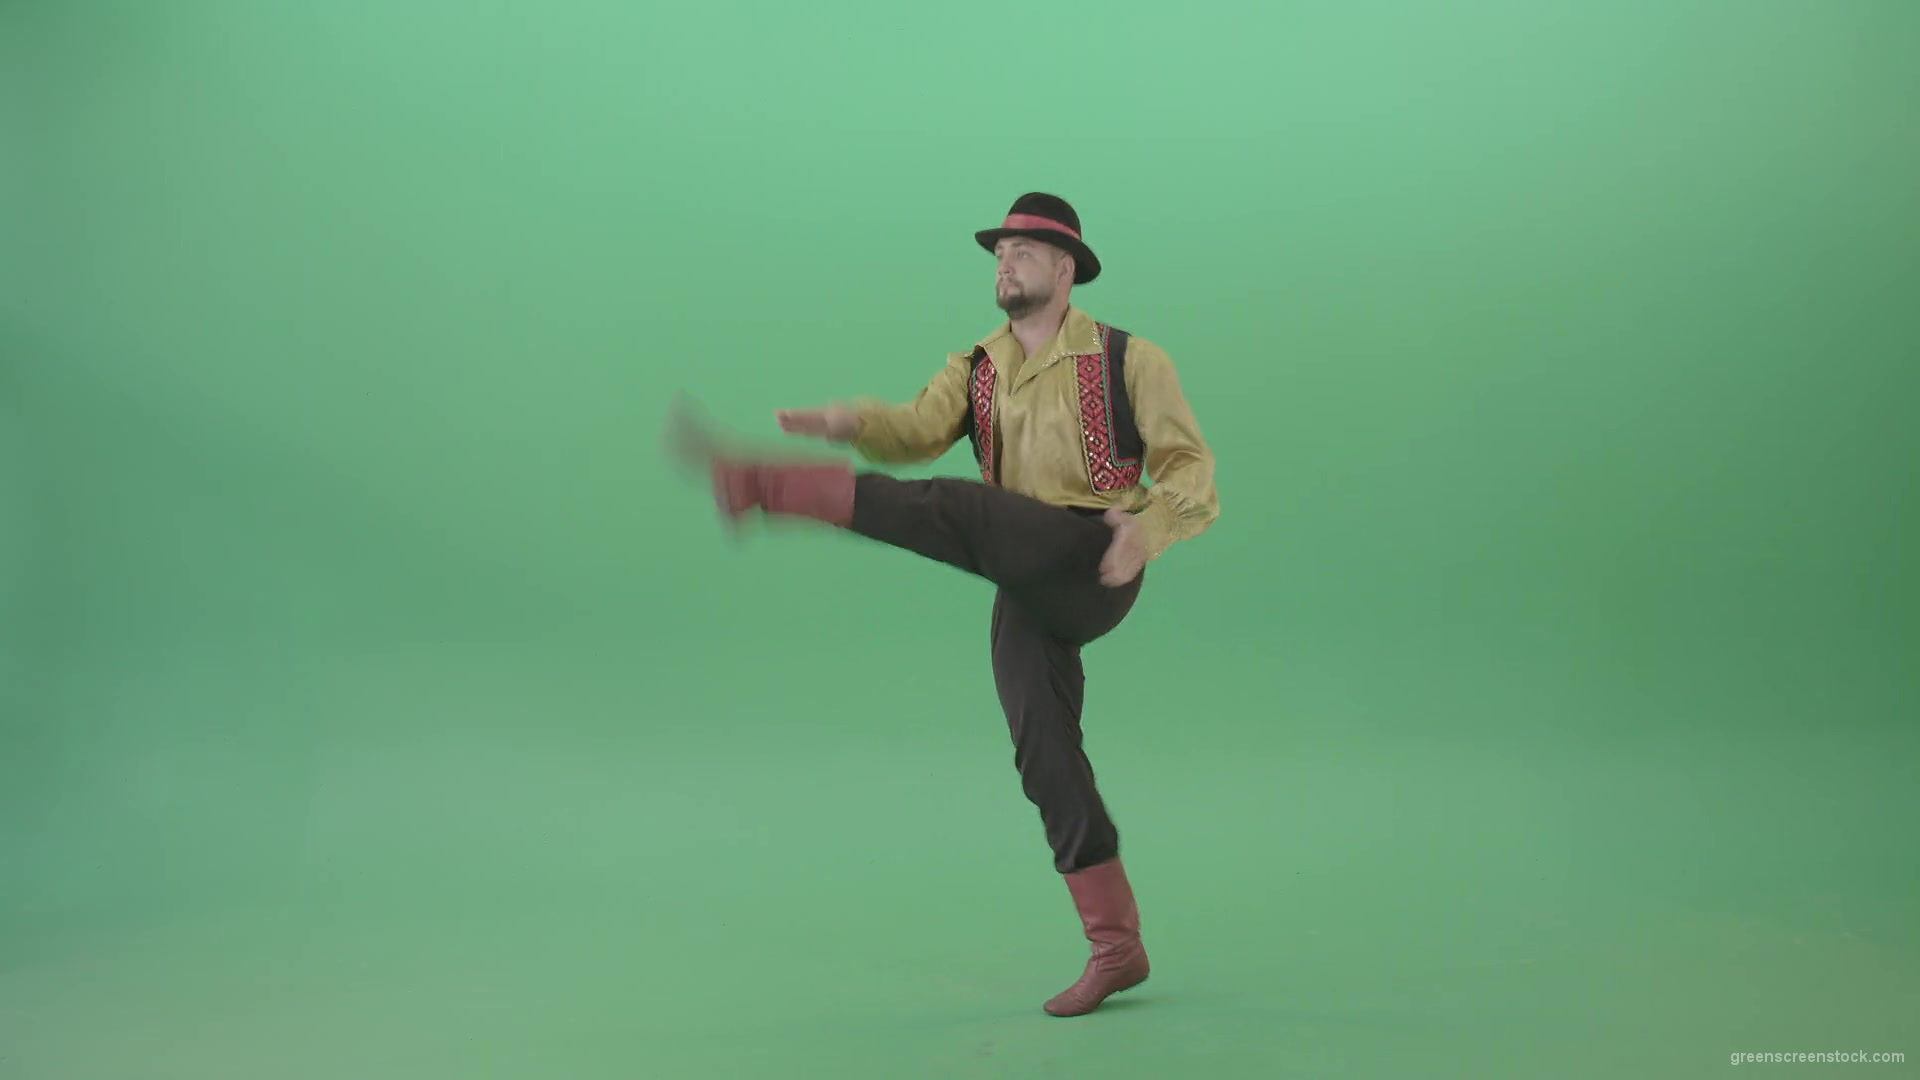 Balcan-gipsy-man-dancer-showing-clapping-moves-isolated-on-green-screen-4K-Video-Footage-1920_007 Green Screen Stock